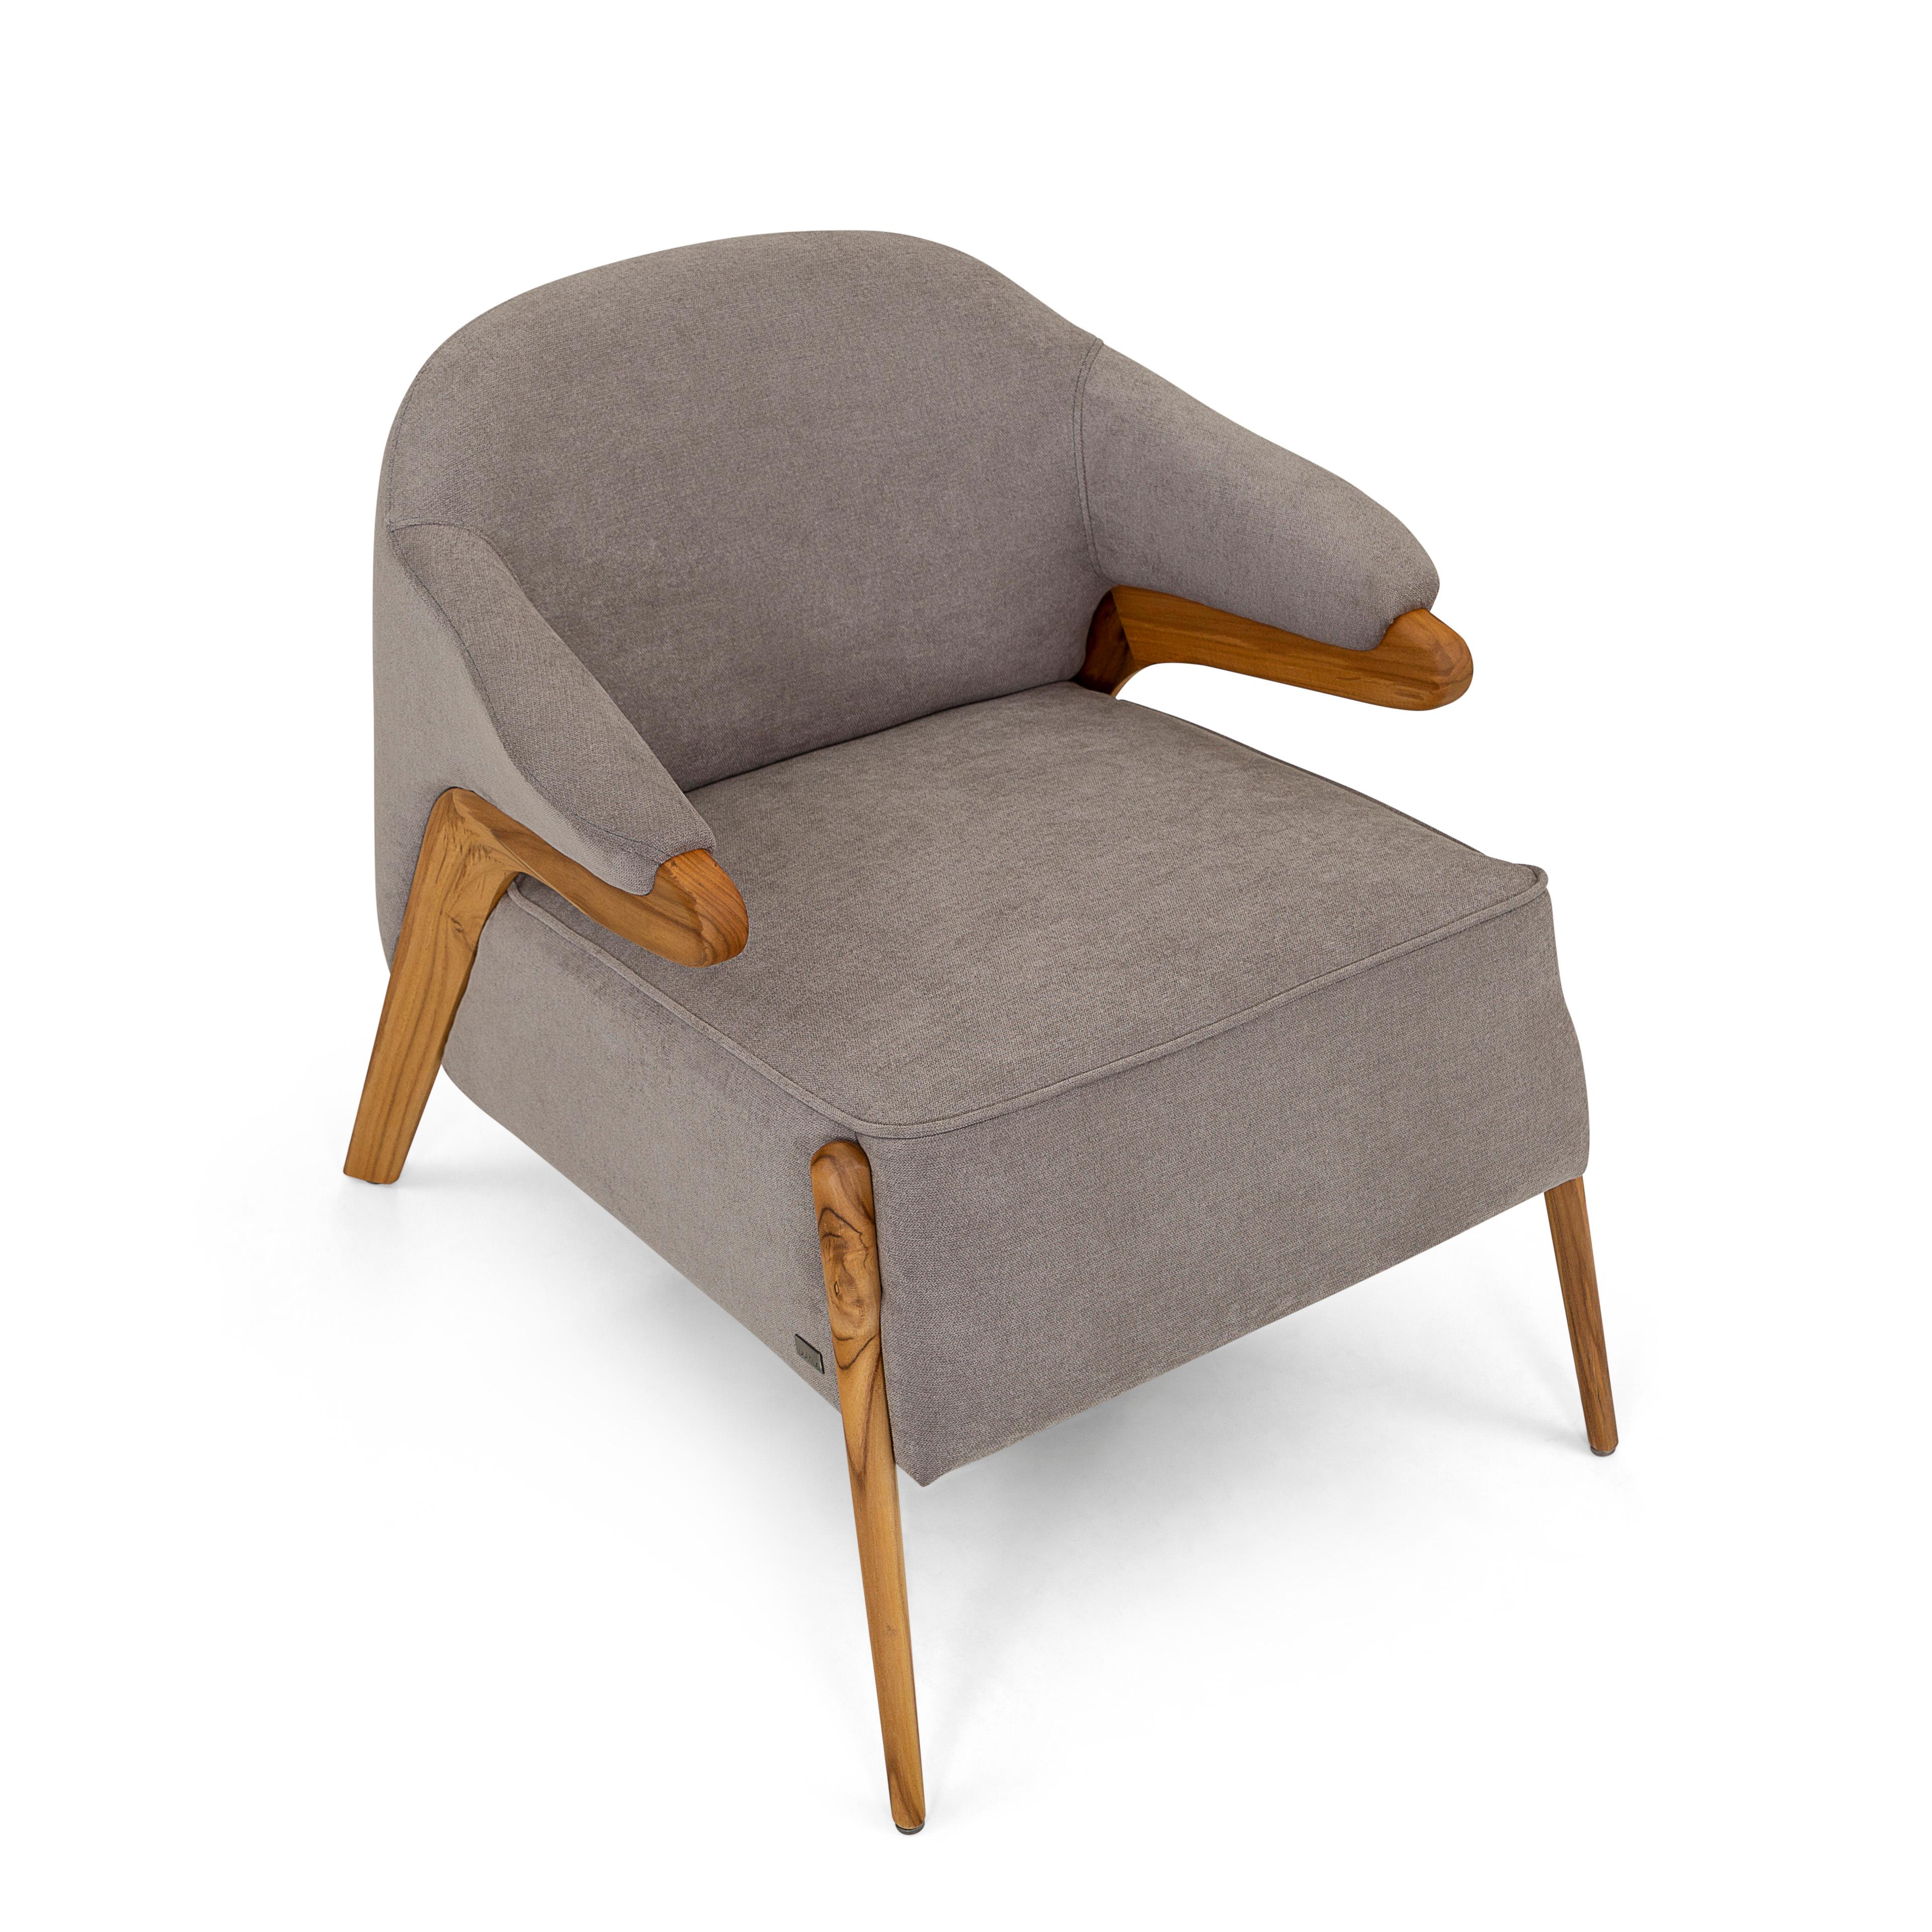 Upholstery Osa Upholstered Curve Back Armchair in Teak Finish and Gray Fabric